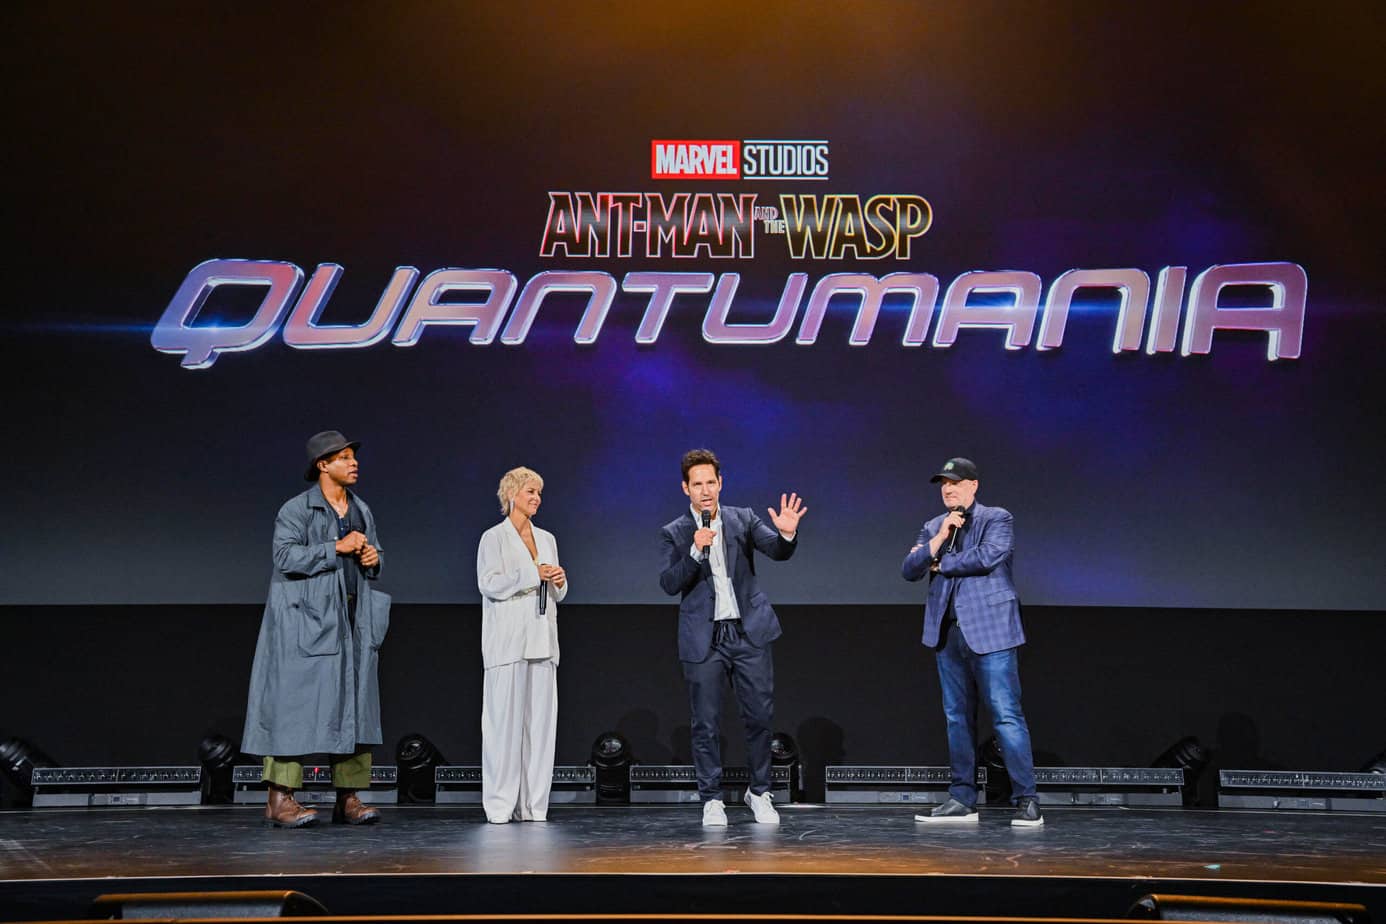 Jonathan Majors, Evangeline Lilly, and Paul Rudd on stage with Kevin Feige during the Marvel Studios panel at D23 Expo 2022 with the Ant-Man and the Wasp Quantumania logo behind them.